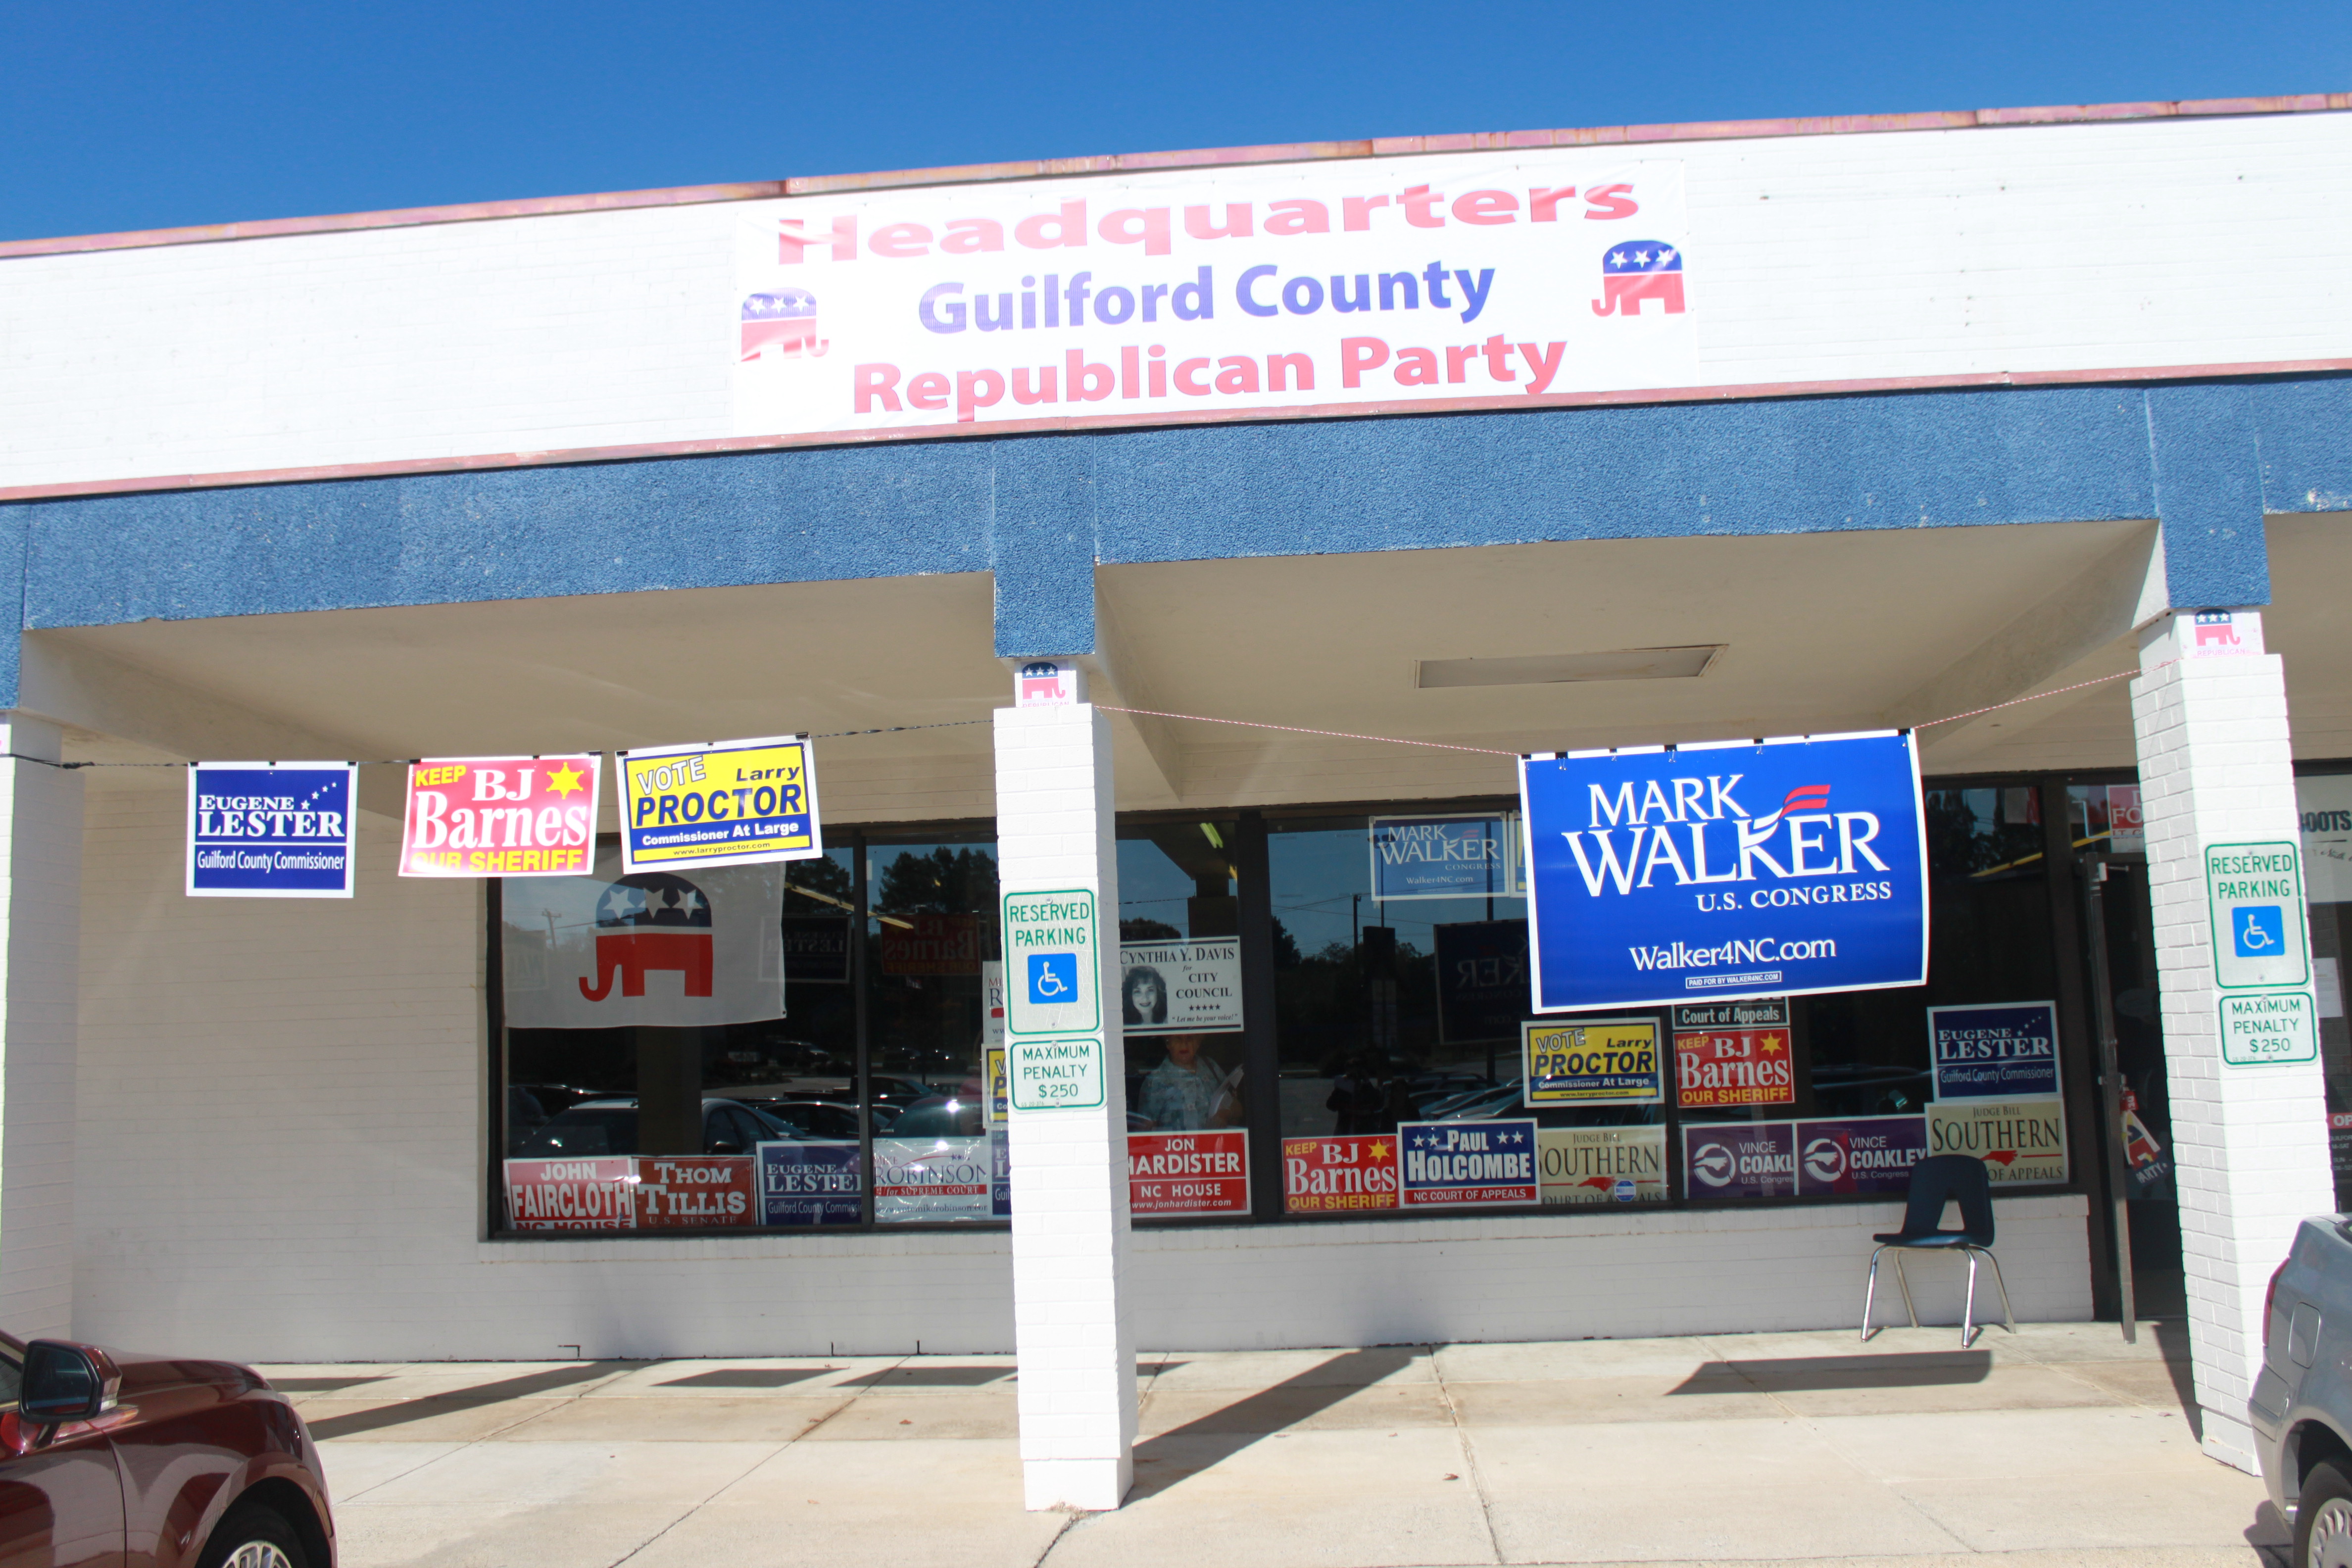 The Guilford County Republican Party headquarters is situated in a rundown commercial center in Hagan's hometown. Photo: Josh Siegel/The Daily Signal